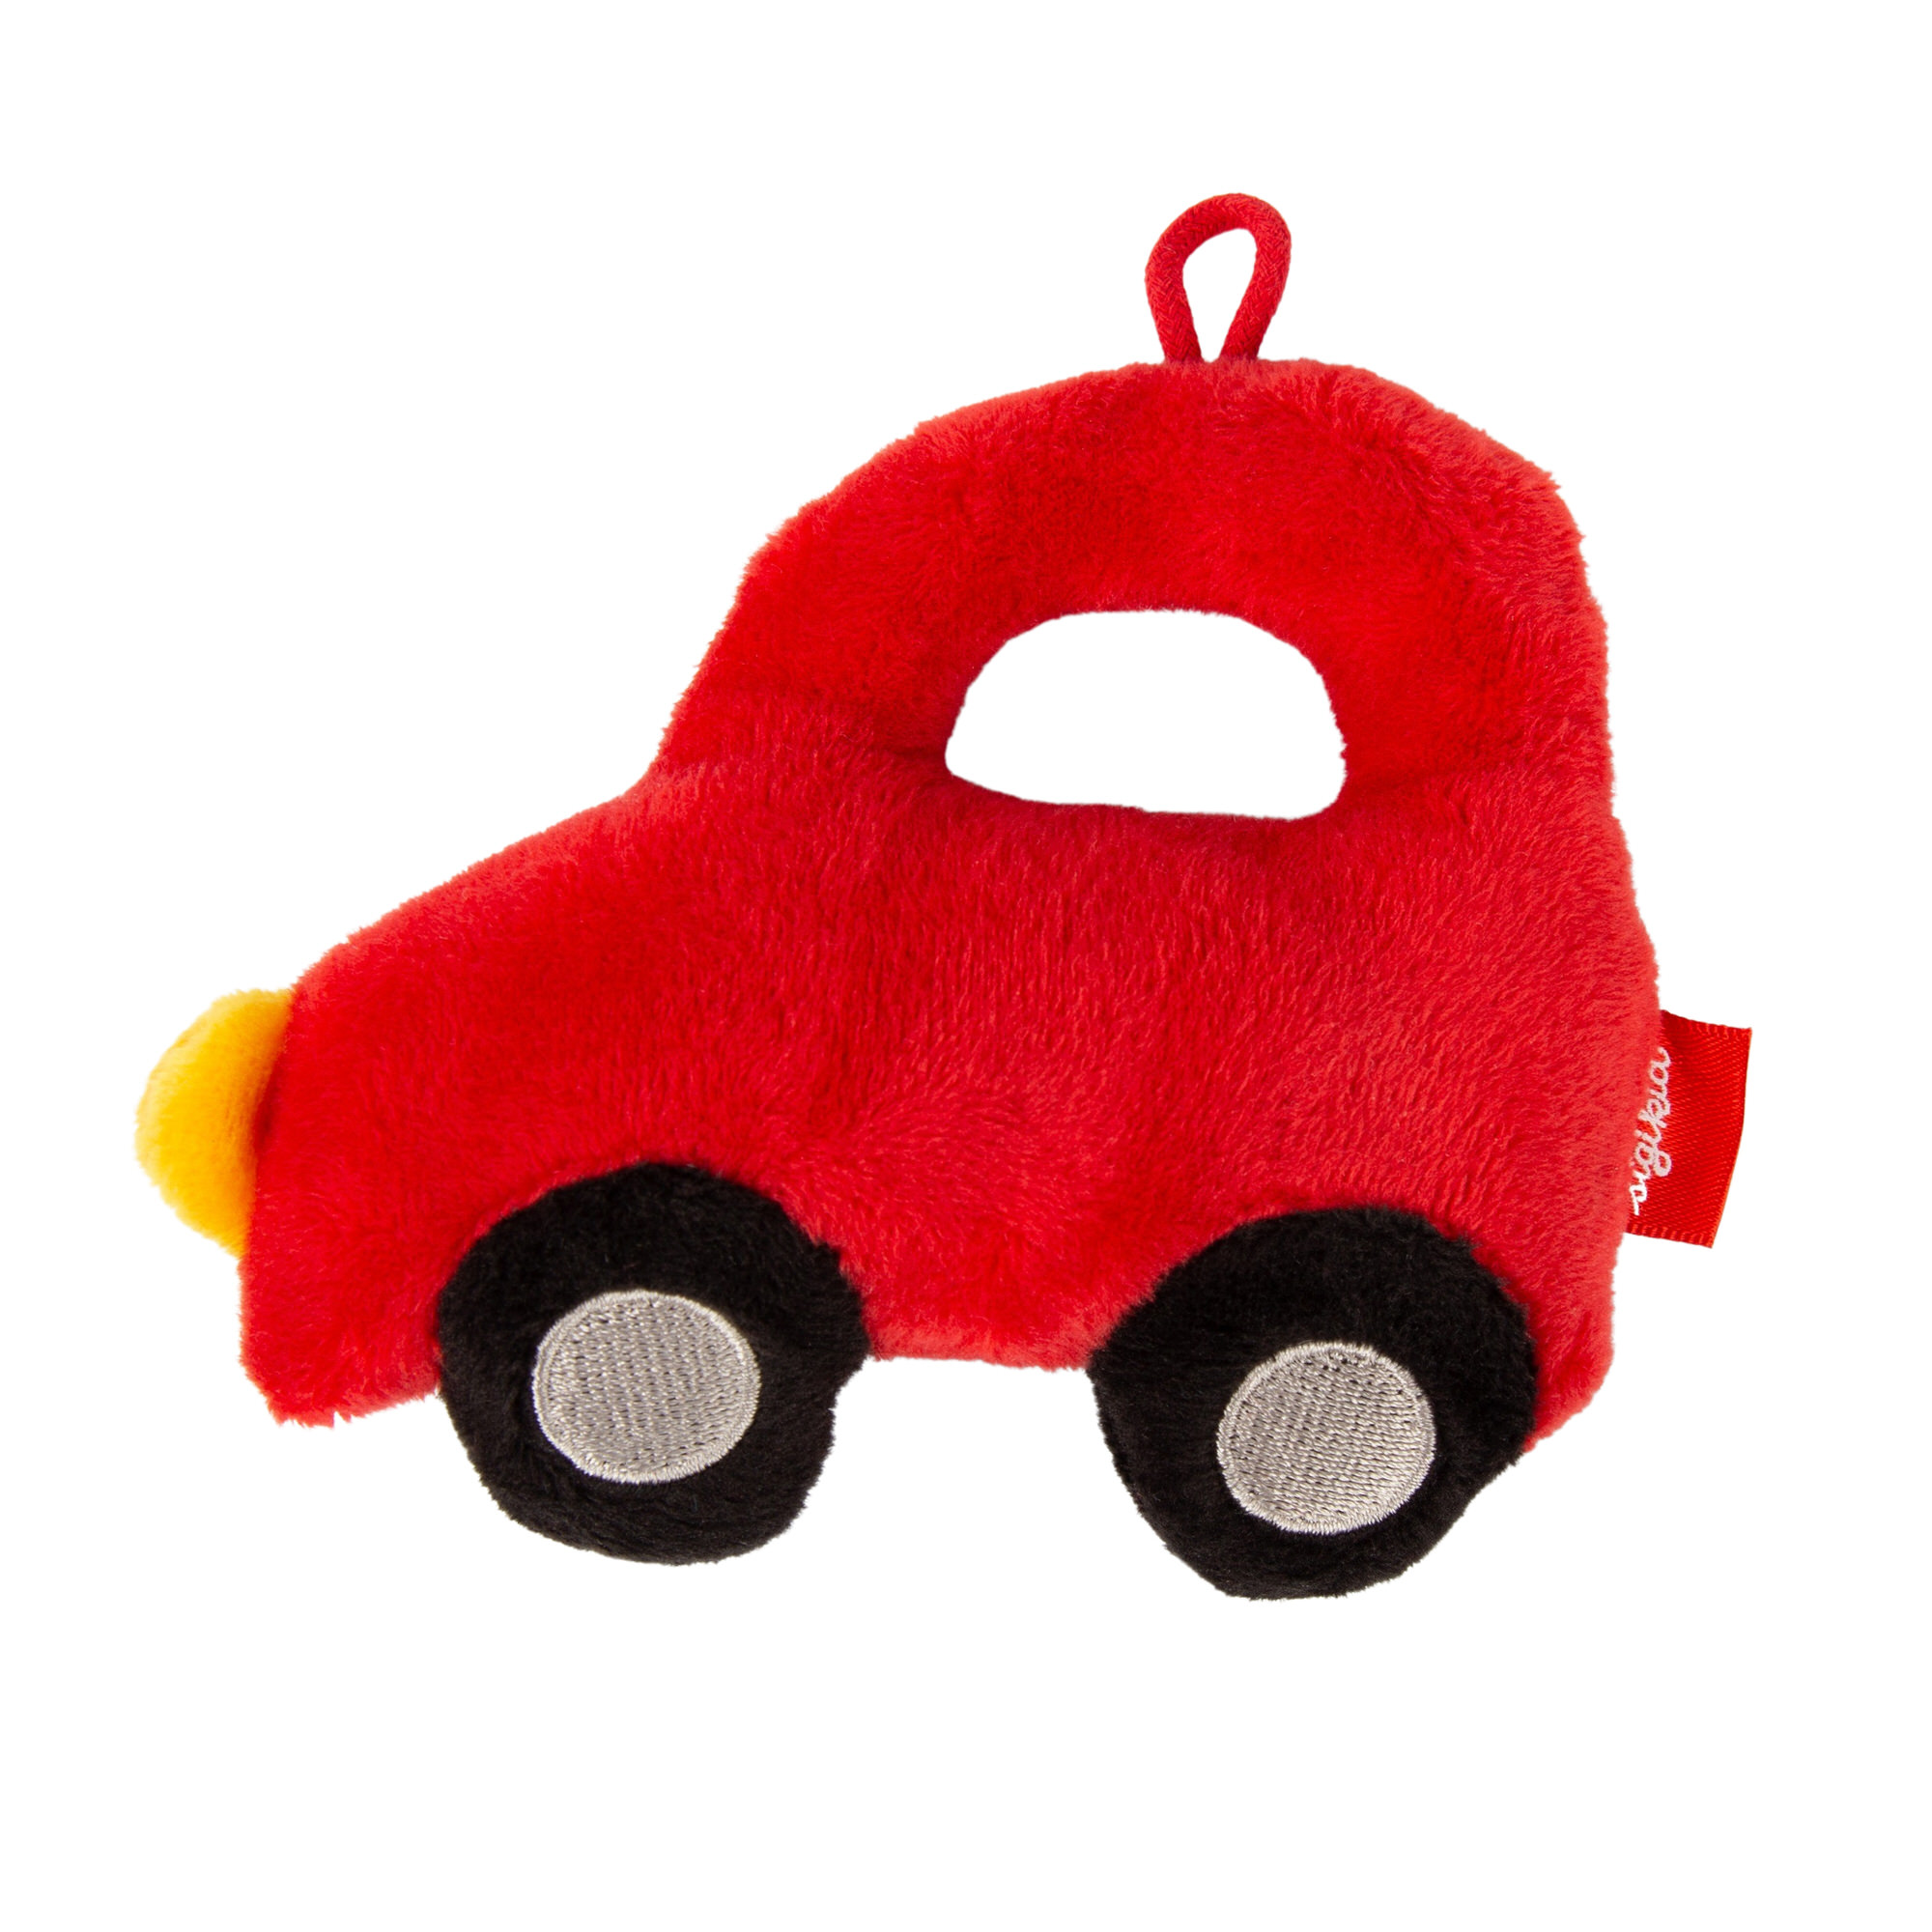 Baby grasp soft toy car, red